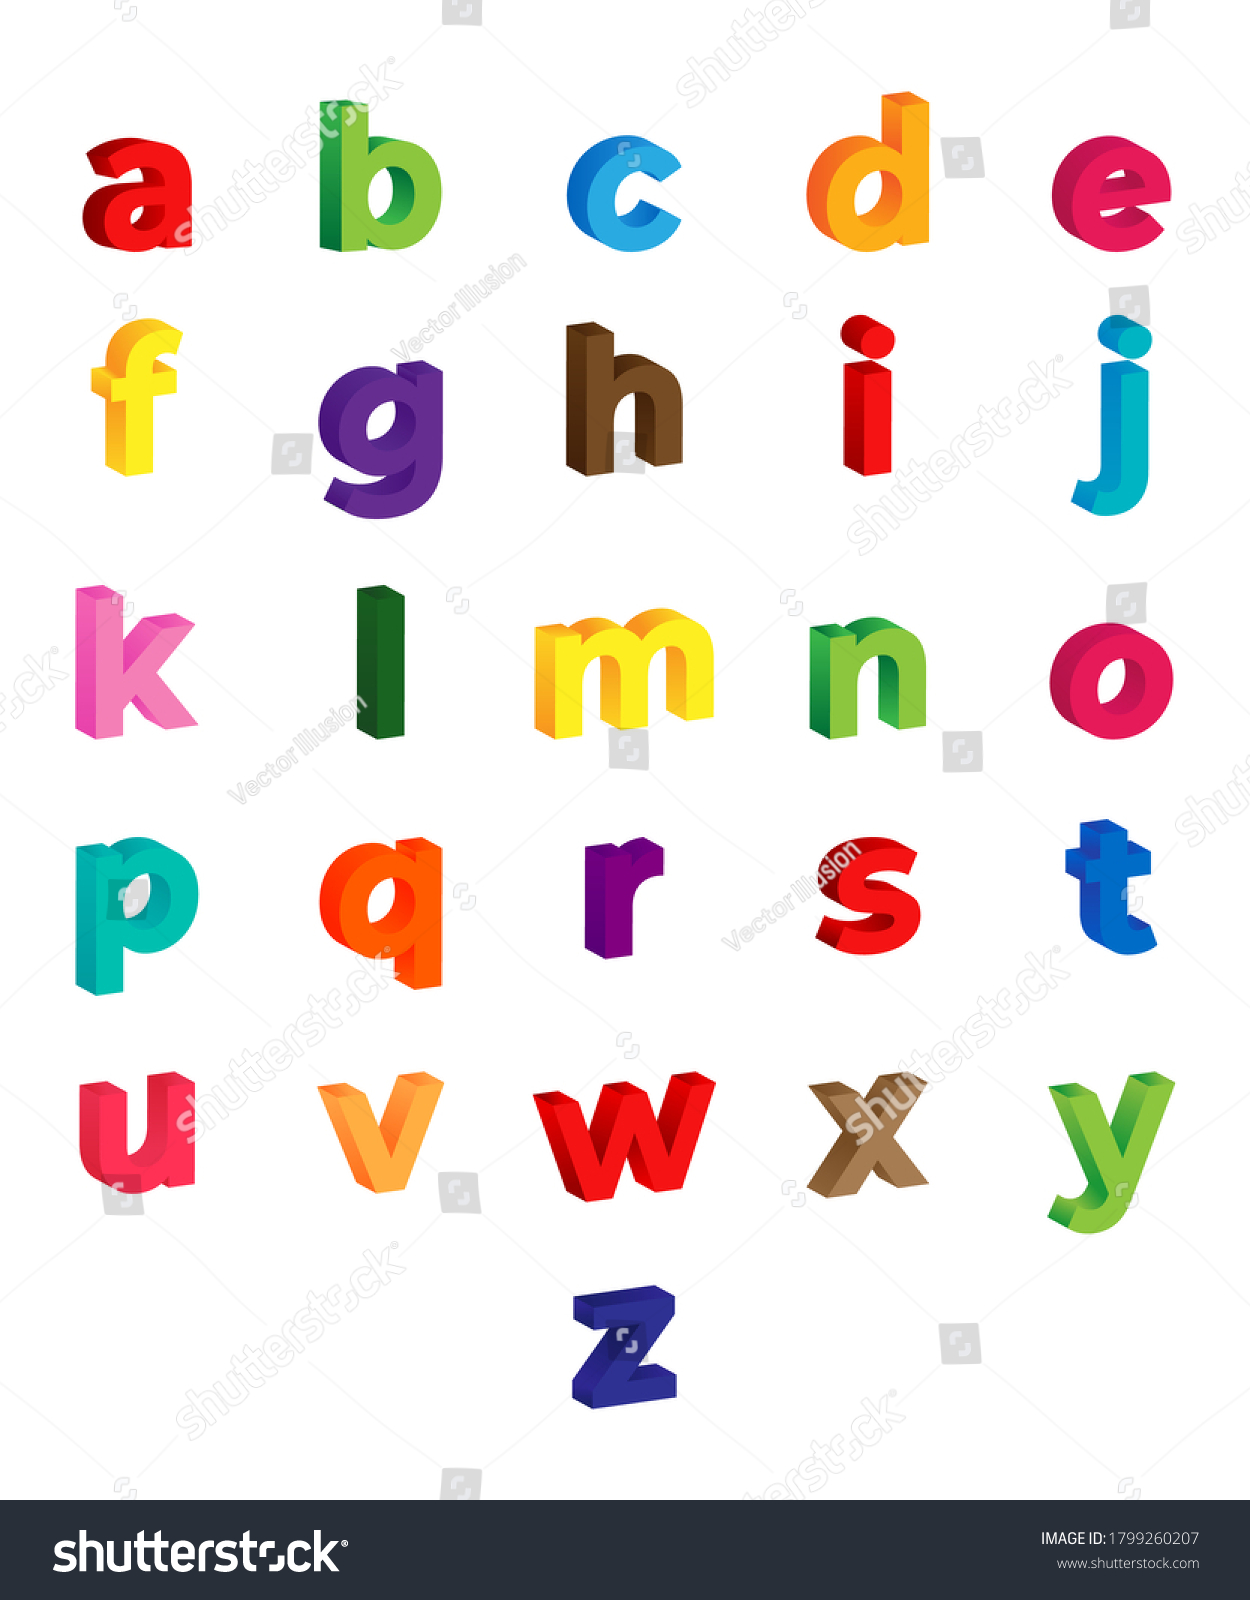 3d-english-alphabet-letters-set-for-children-royalty-free-stock